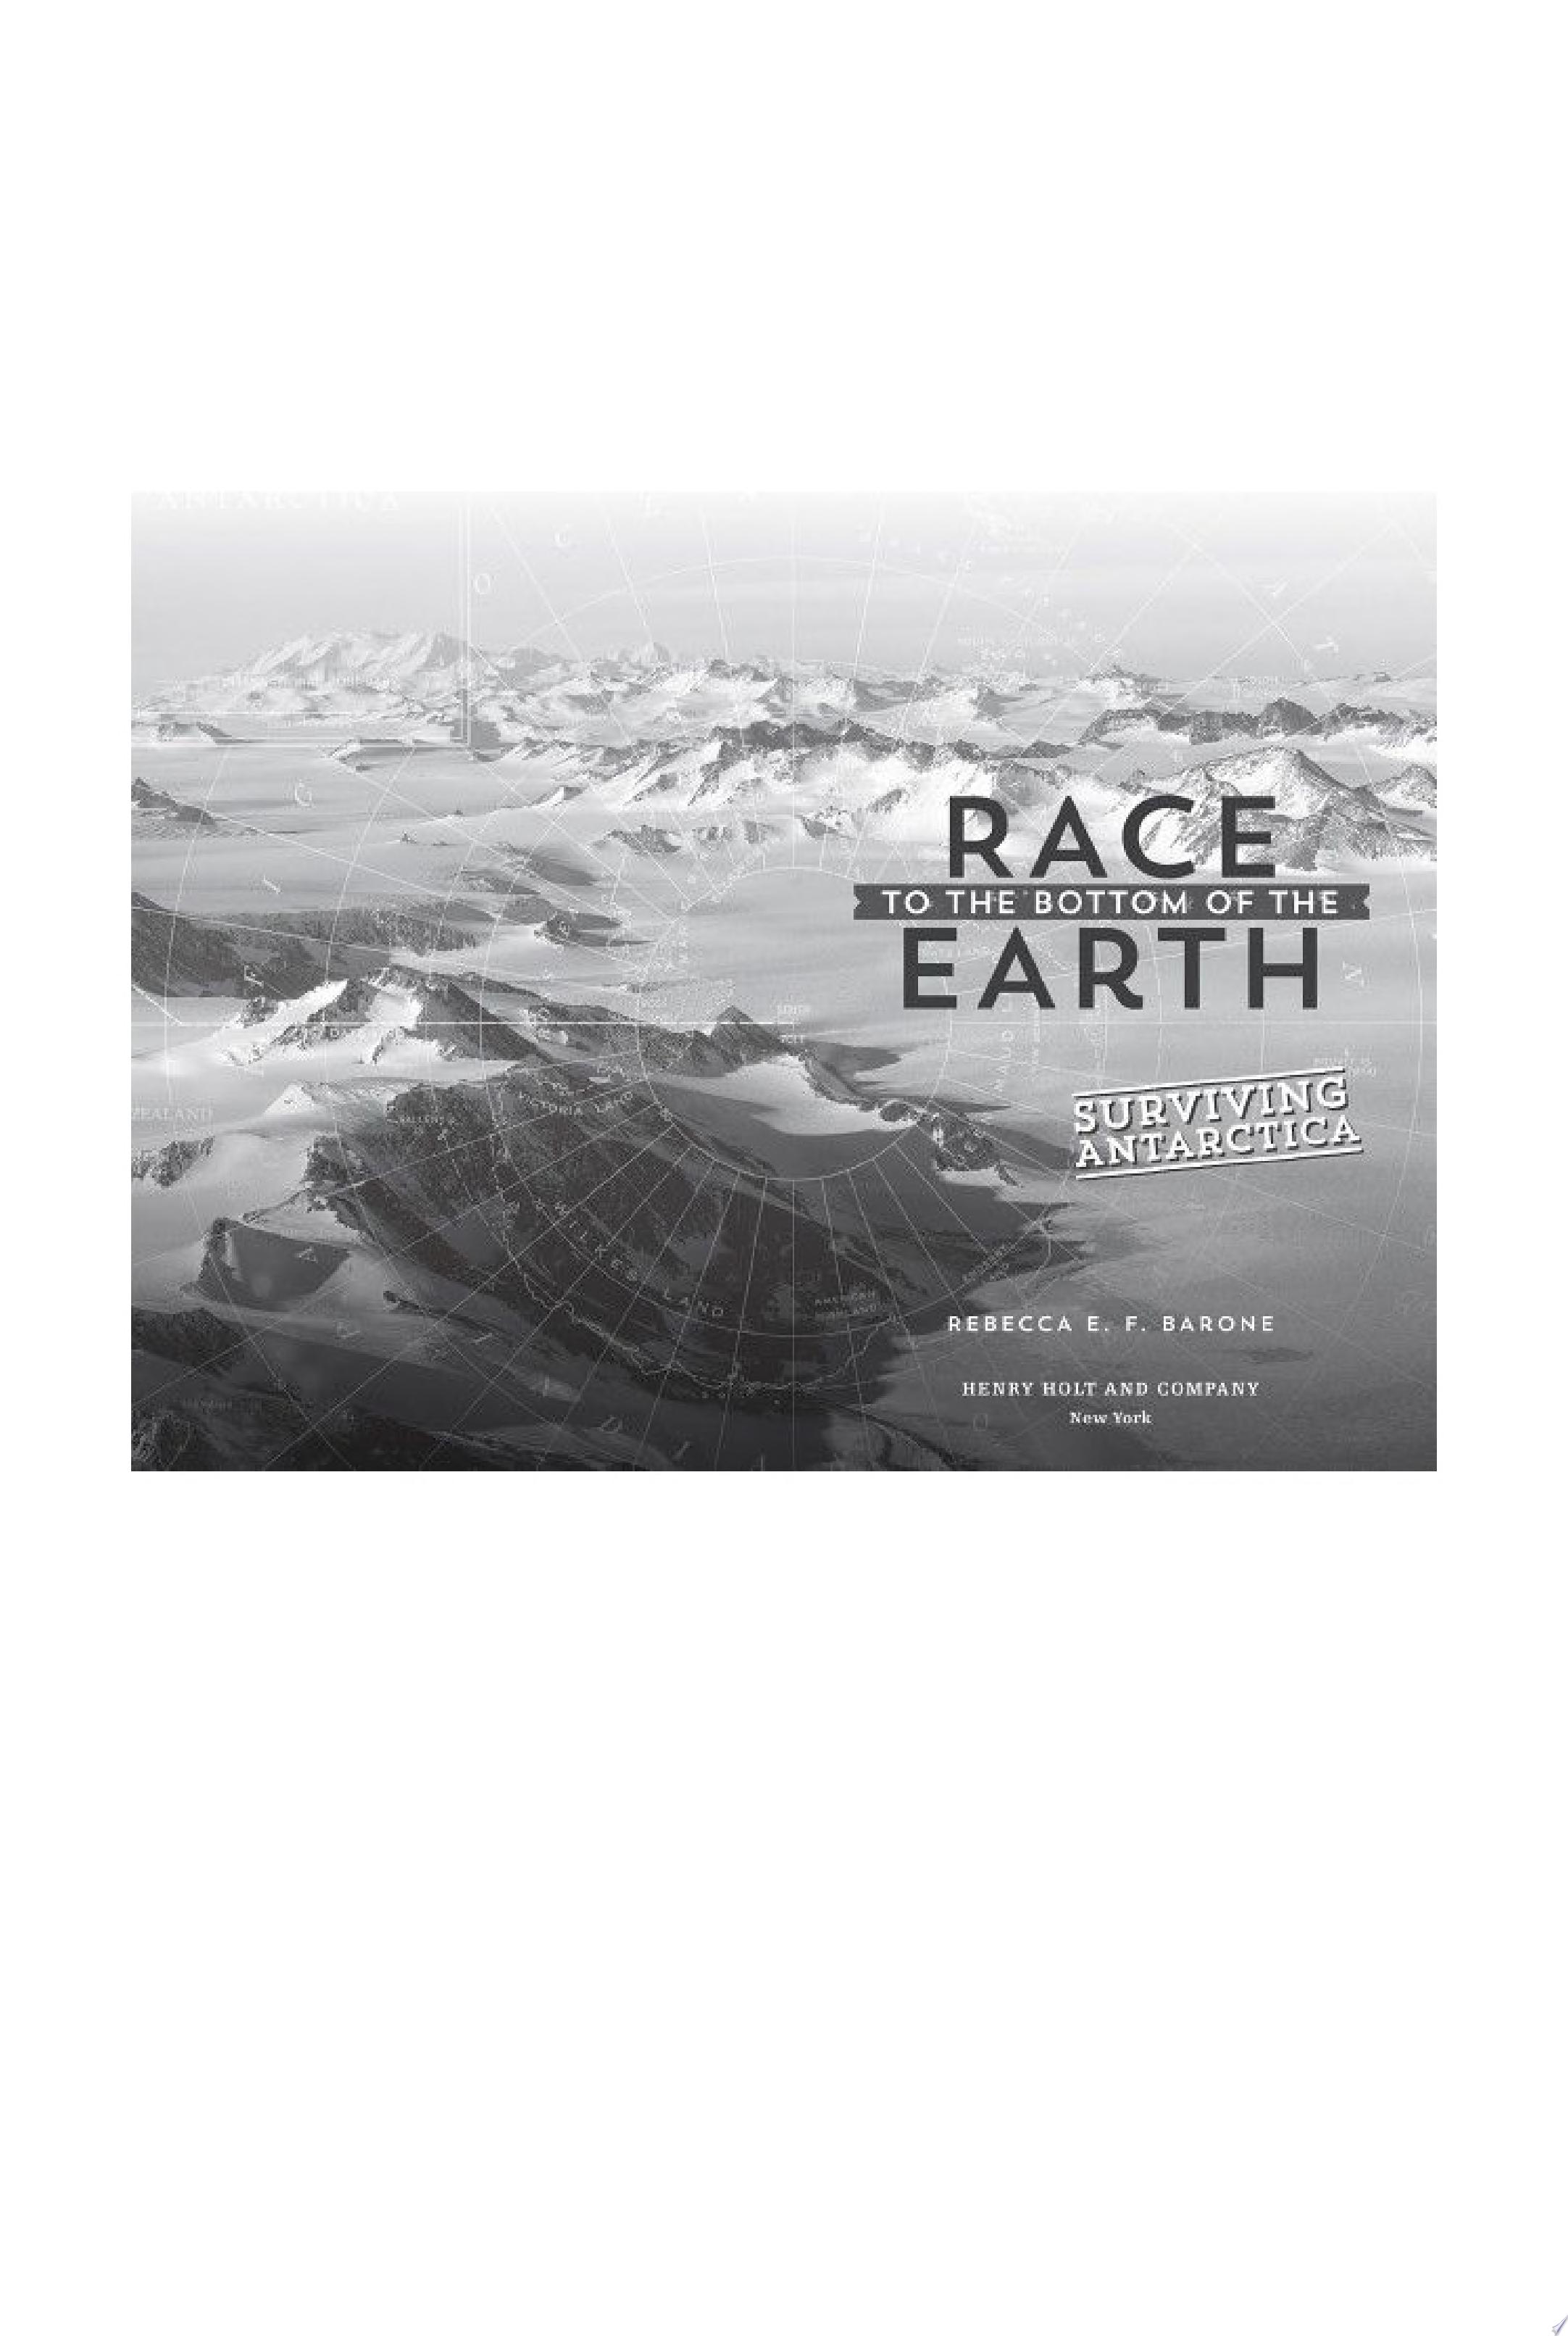 Image for "Race to the Bottom of the Earth"